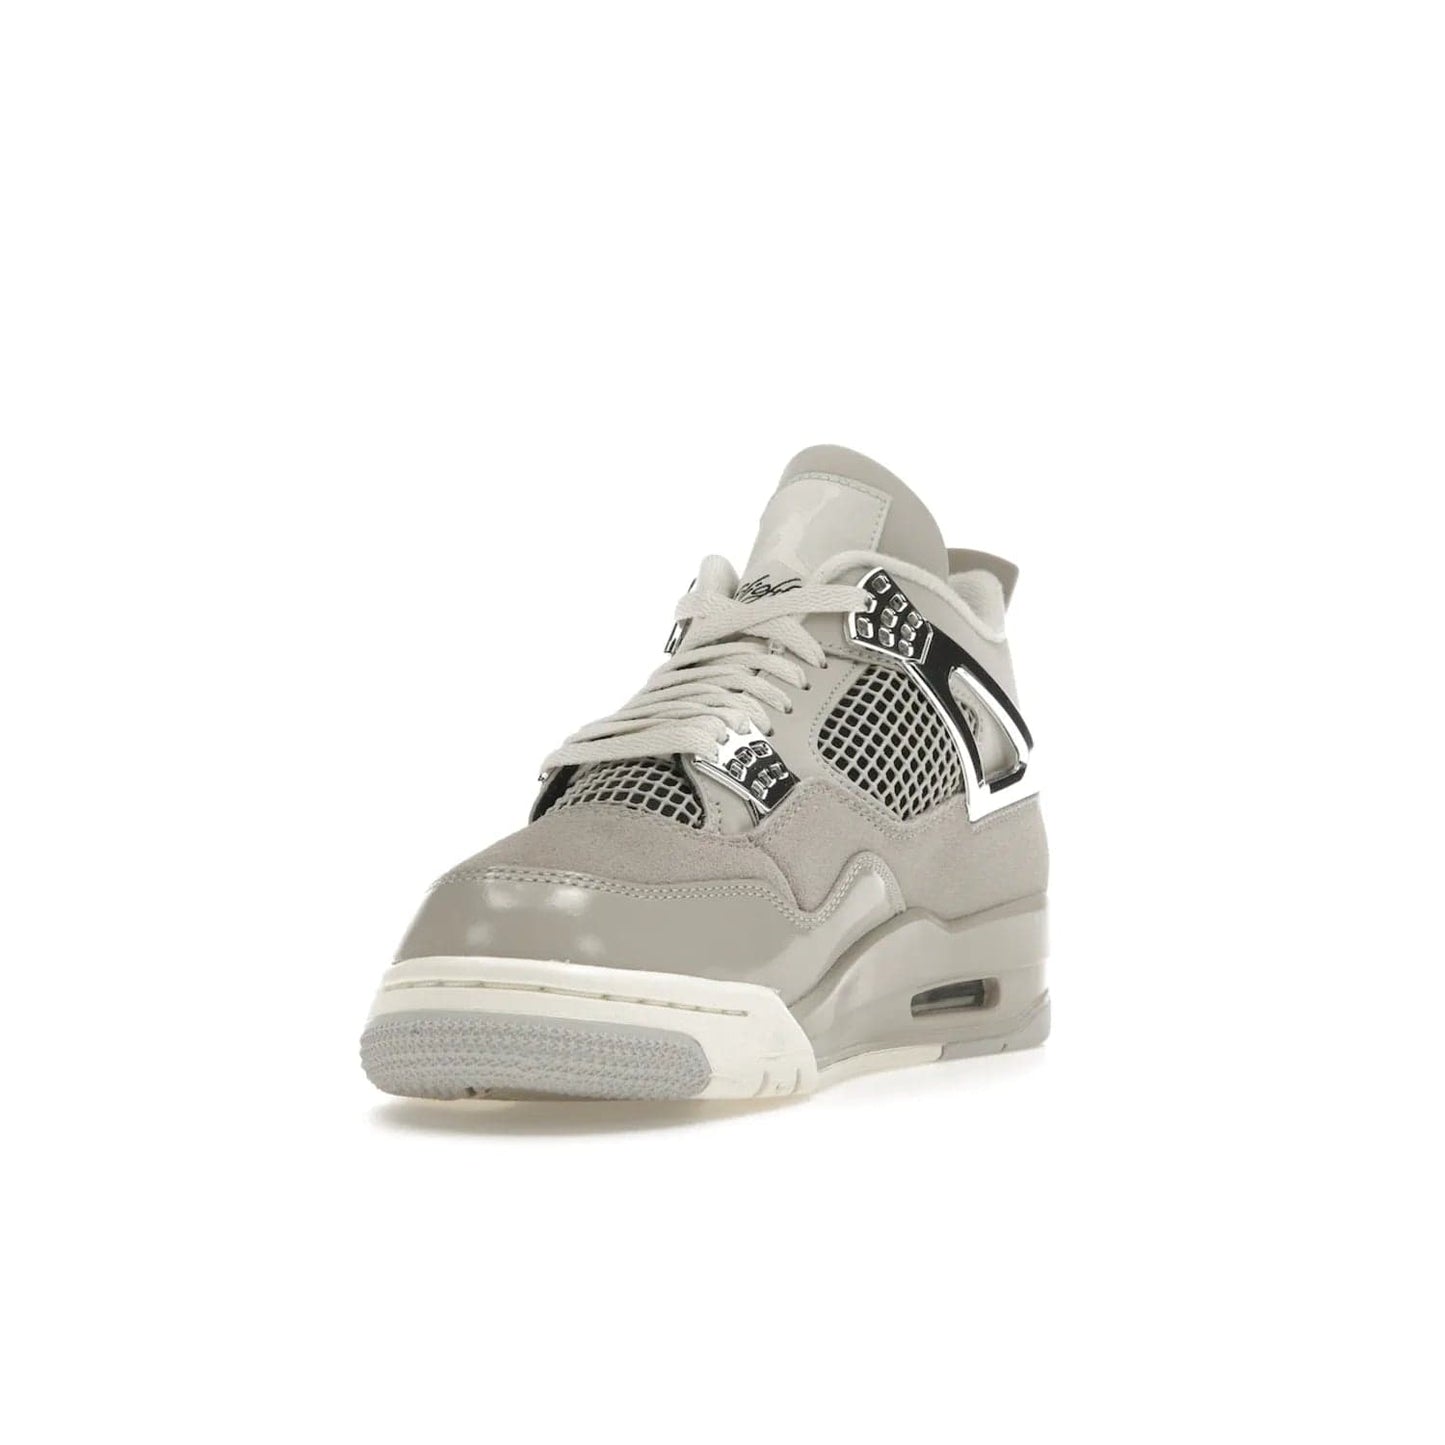 Jordan 4 Retro Frozen Moments (Women's) - Image 13 - Only at www.BallersClubKickz.com - The Jordan 4 Retro Frozen Moments is a stylish blend of classic design elements and modern tones. Featuring suede and leather overlays in a light iron-ore, sail, neutral grey, black, and metallic silver colorway. Get this iconic high-performance sneaker for $210.